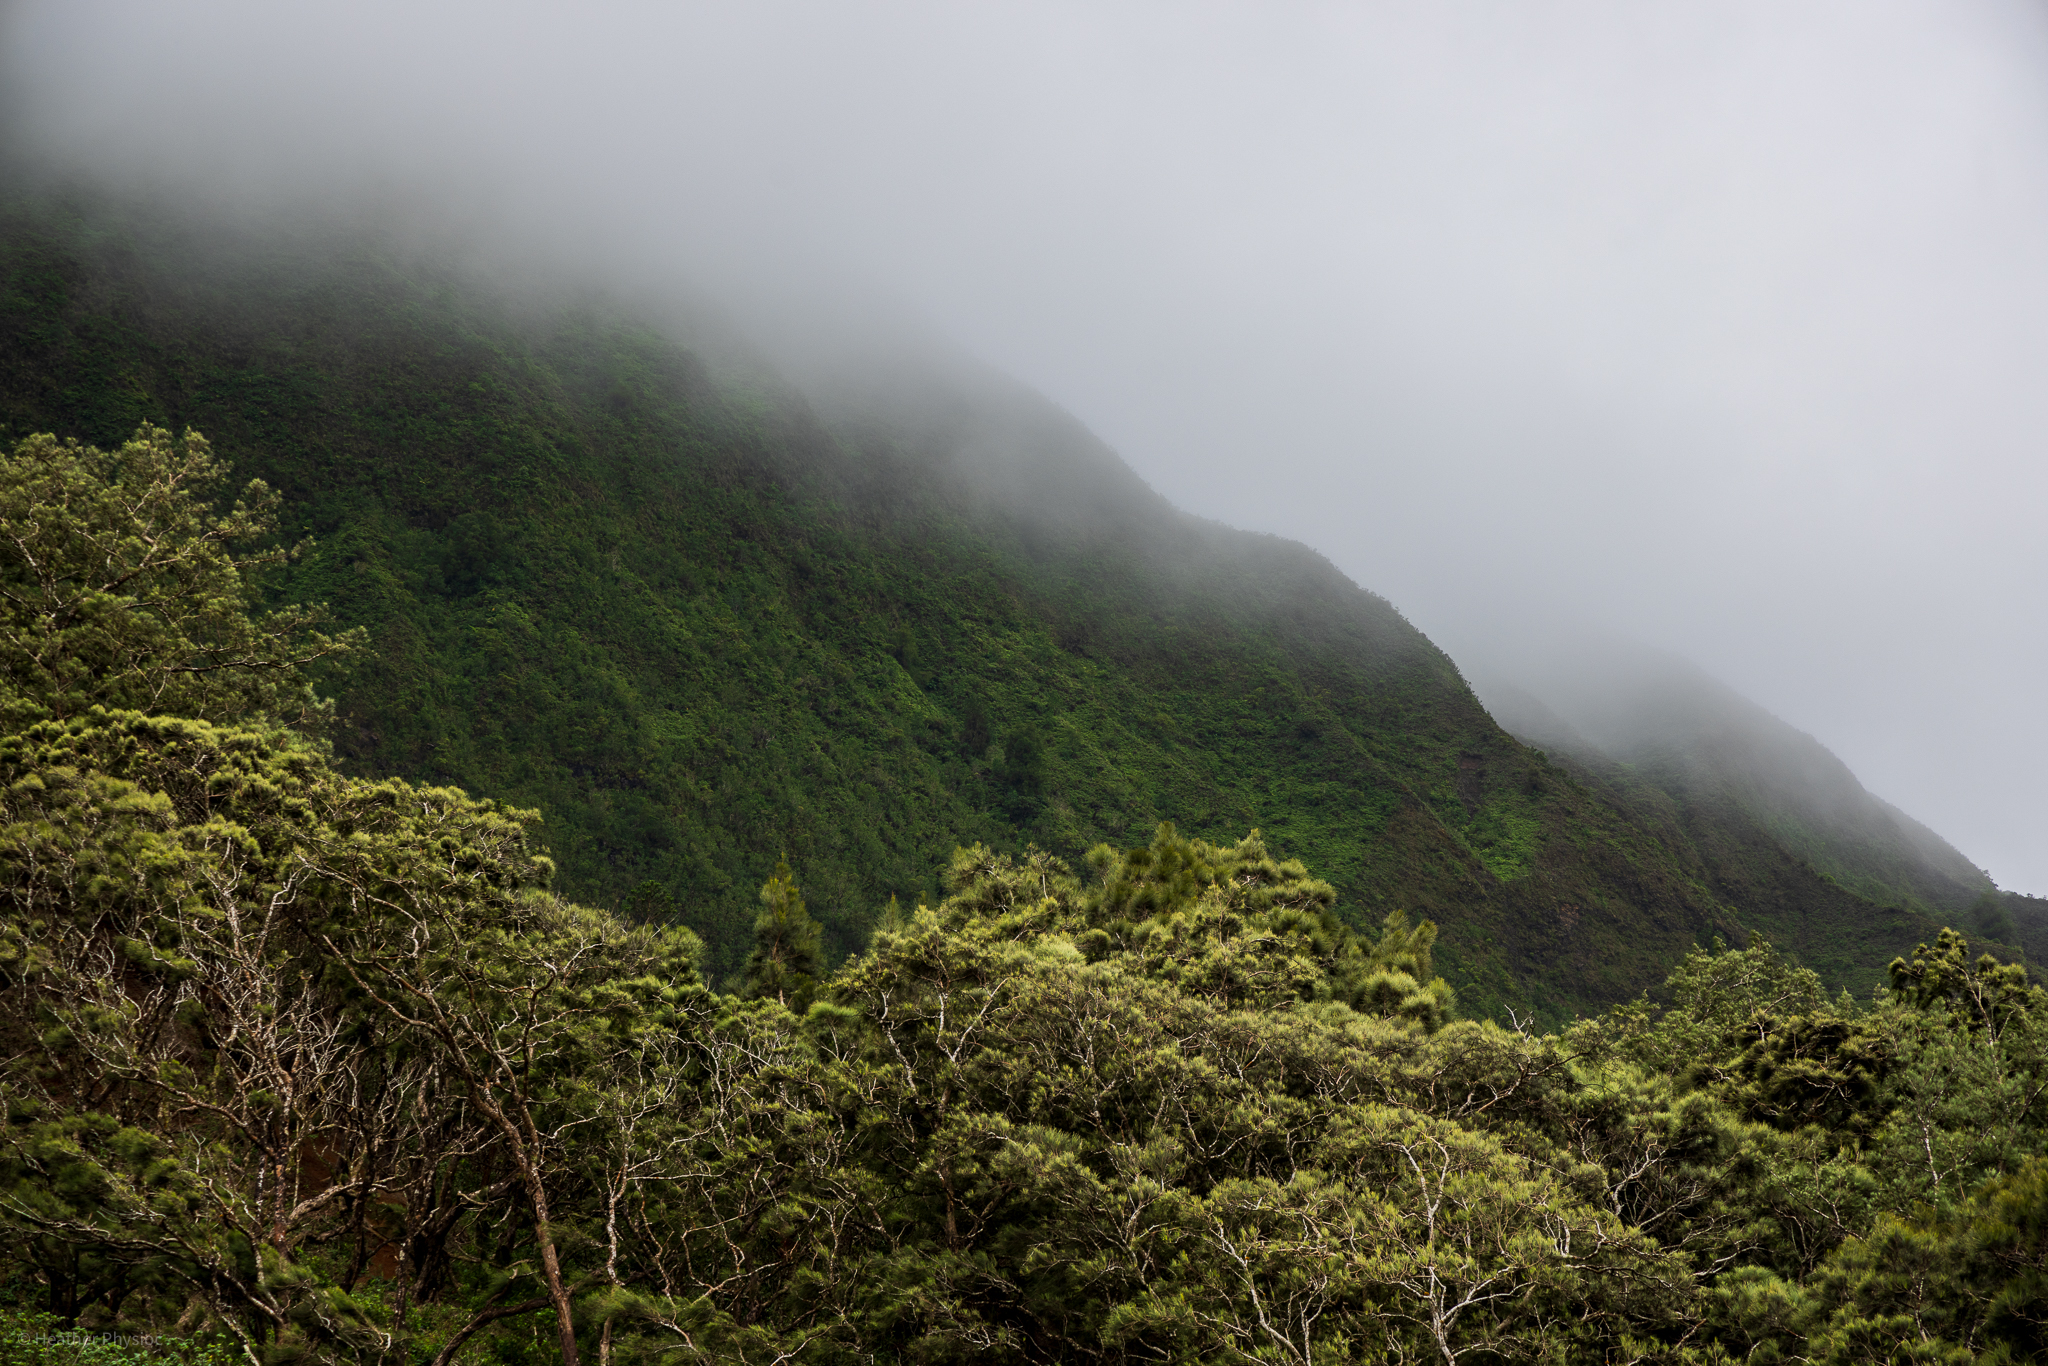 Misty mountainsides at Pali Lookout, Oahu Hawaii